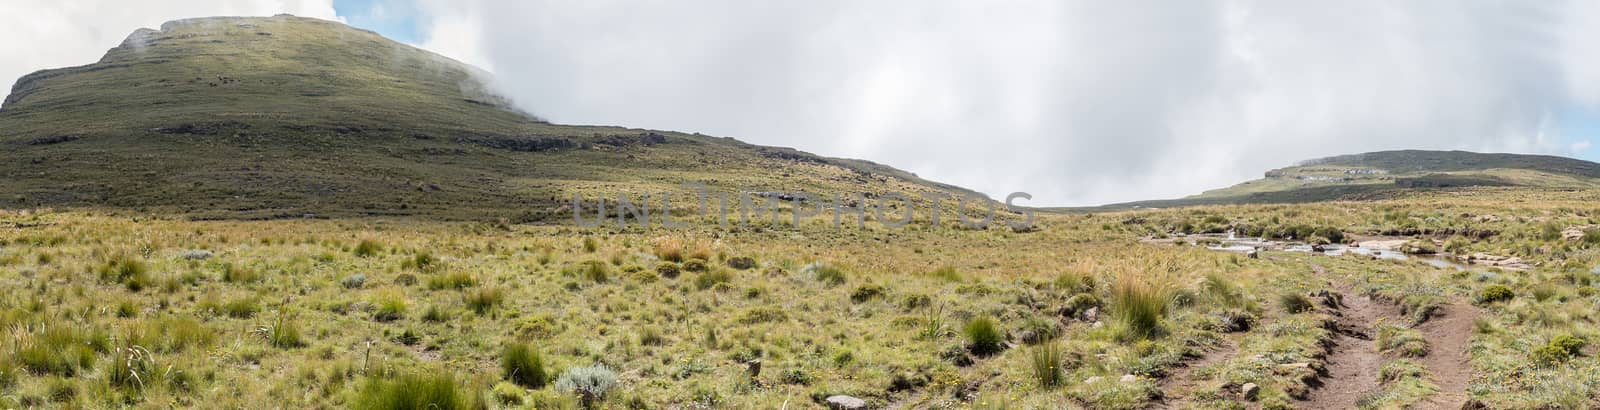 Panorama of the Sentinel hiking trail to the Tugela Falls crossing the Tugela River. Cattle are visible on the Western Buttress